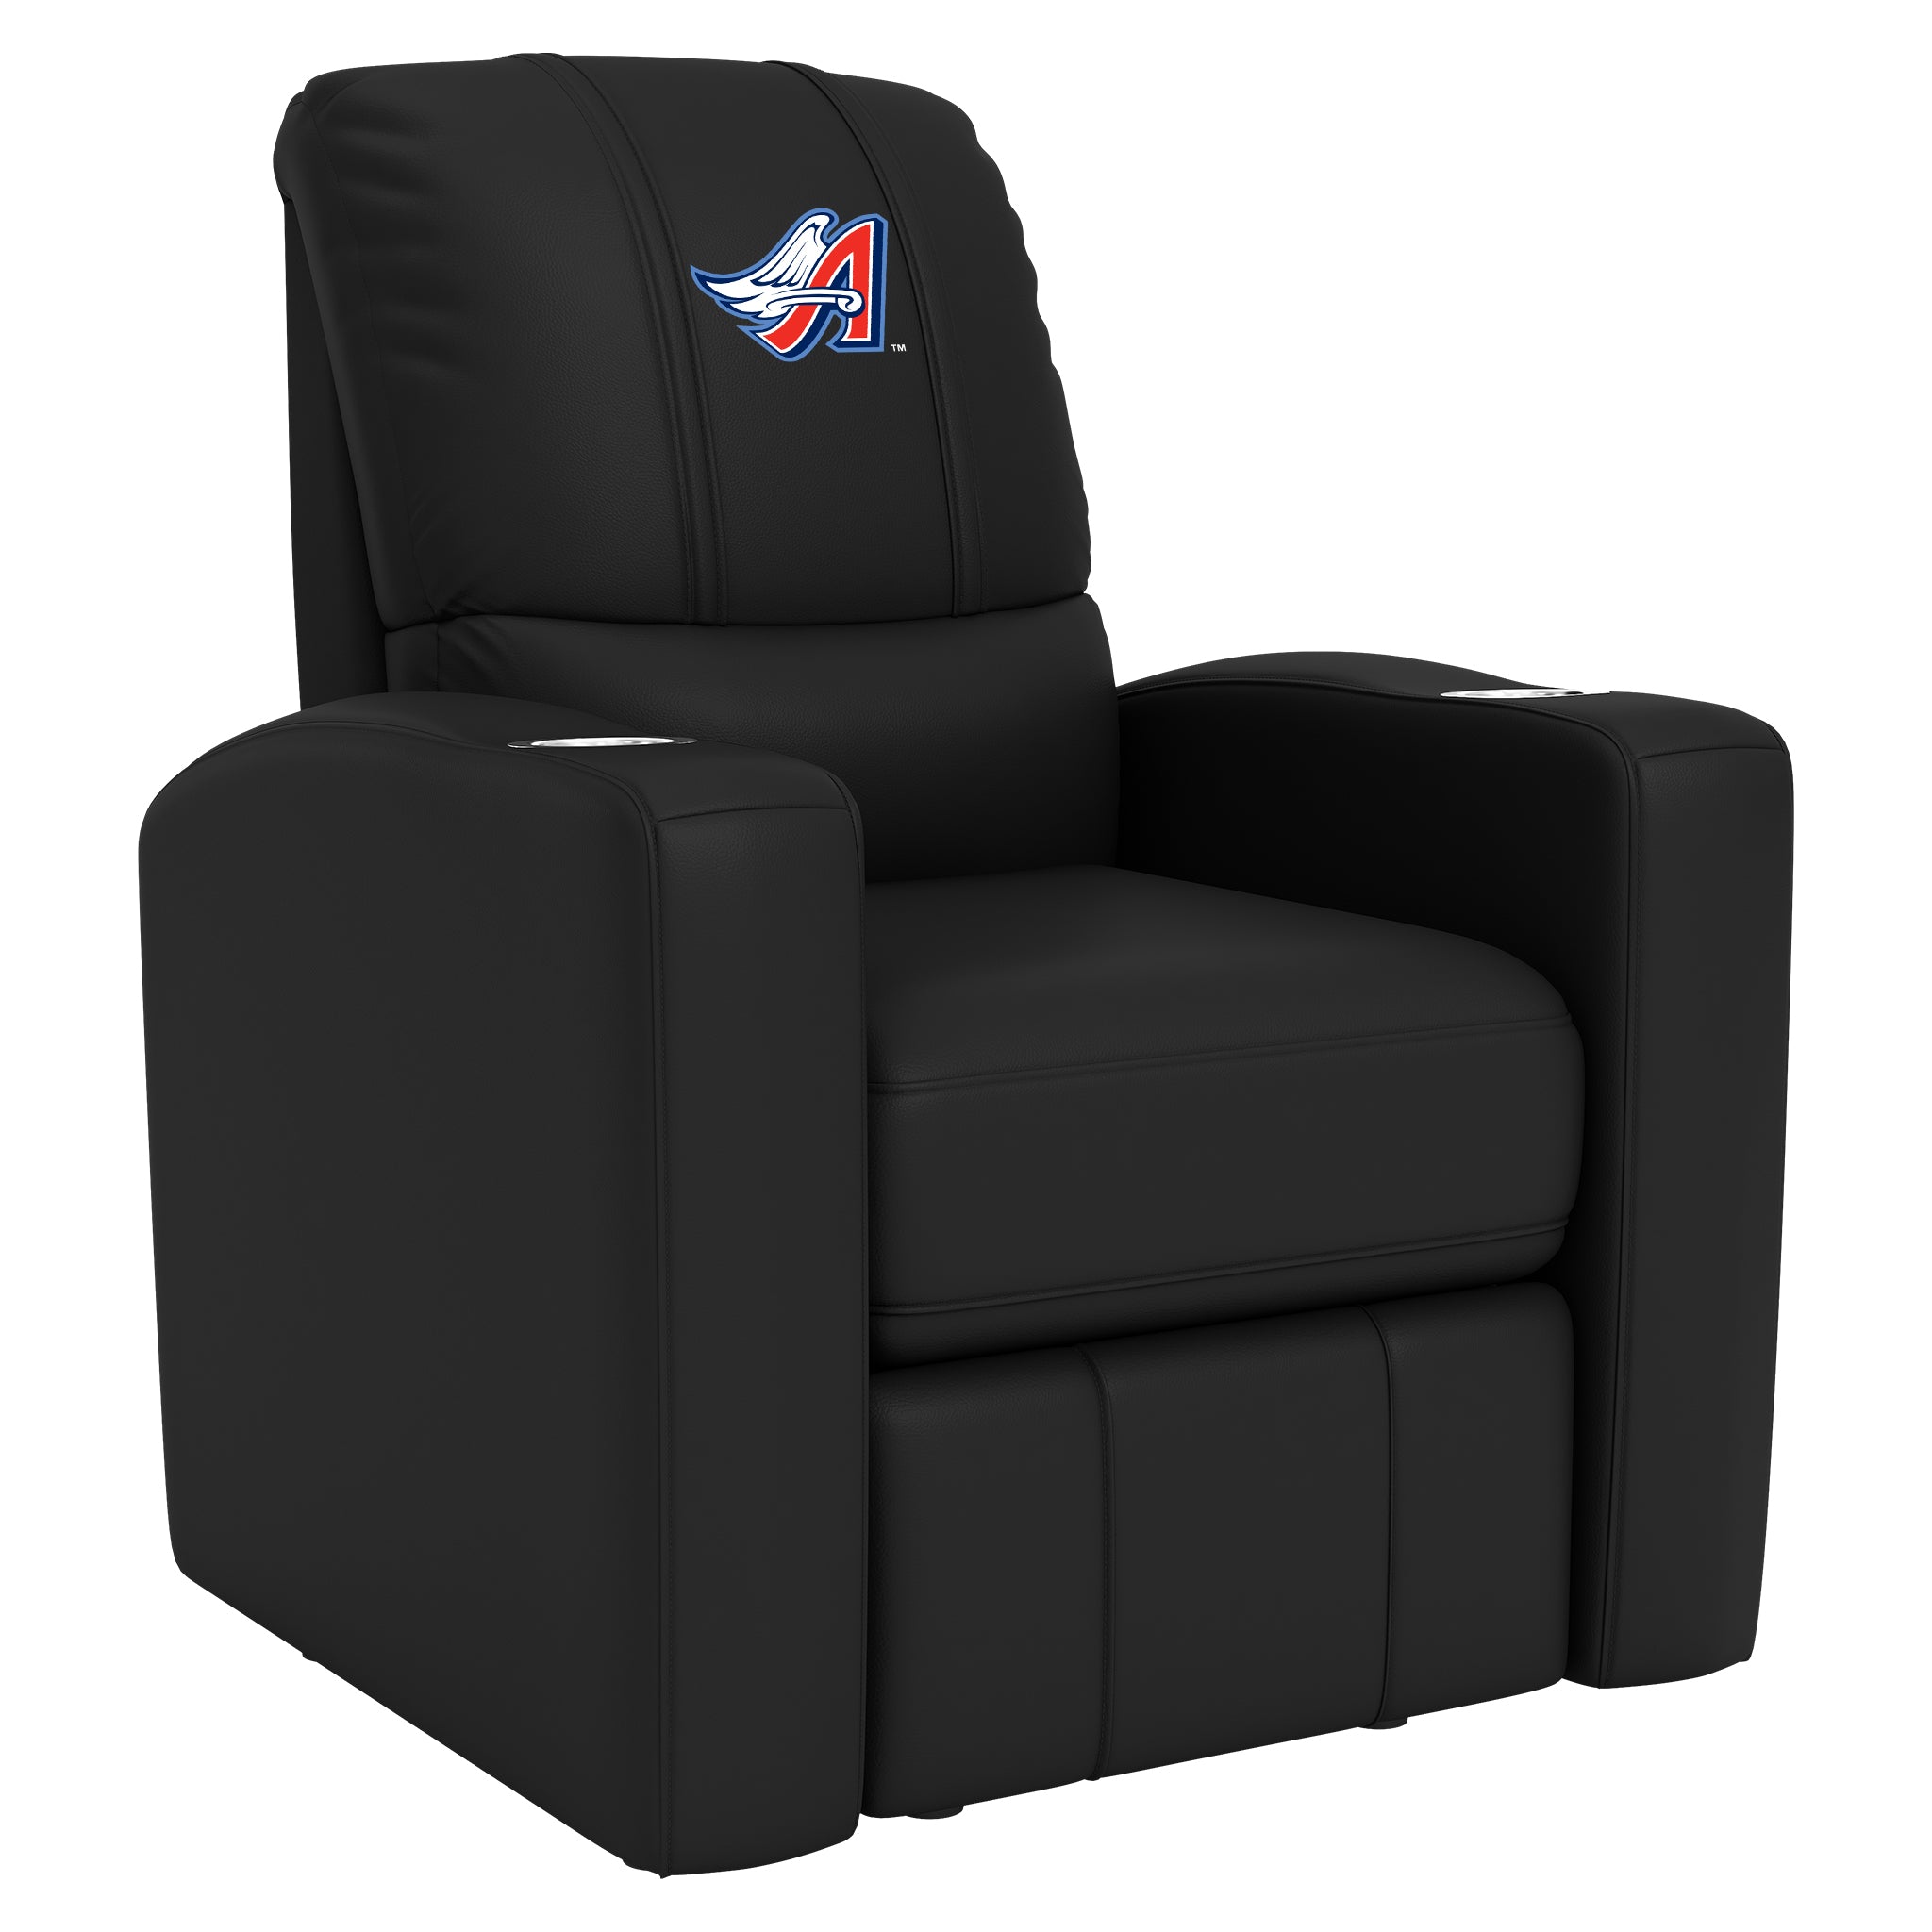 Stealth Recliner with California Angels Cooperstown Primary